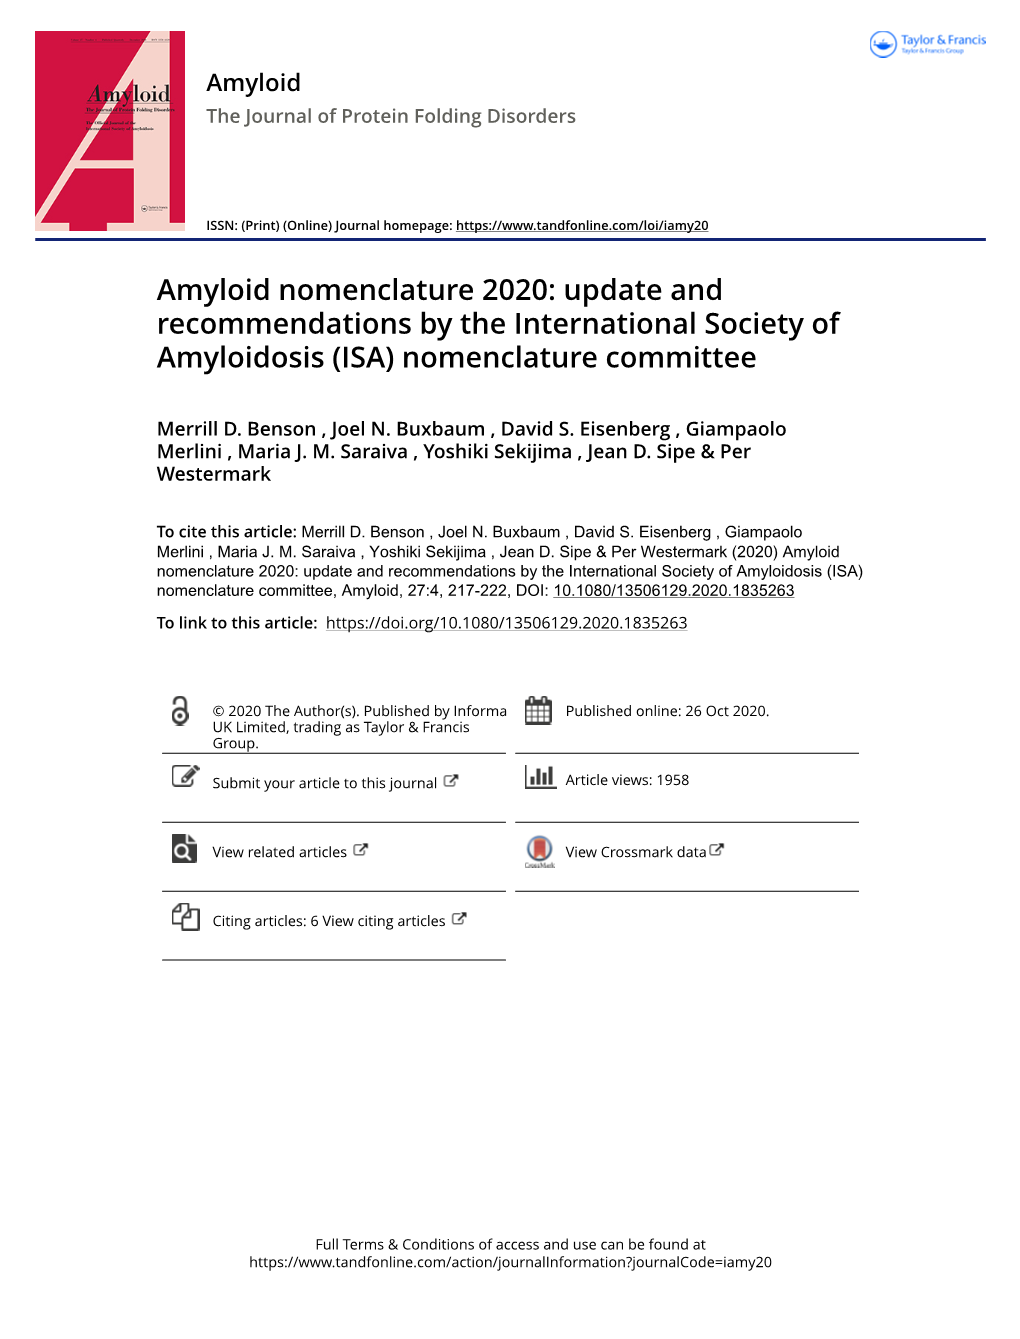 Amyloid Nomenclature 2020: Update and Recommendations by the International Society of Amyloidosis (ISA) Nomenclature Committee